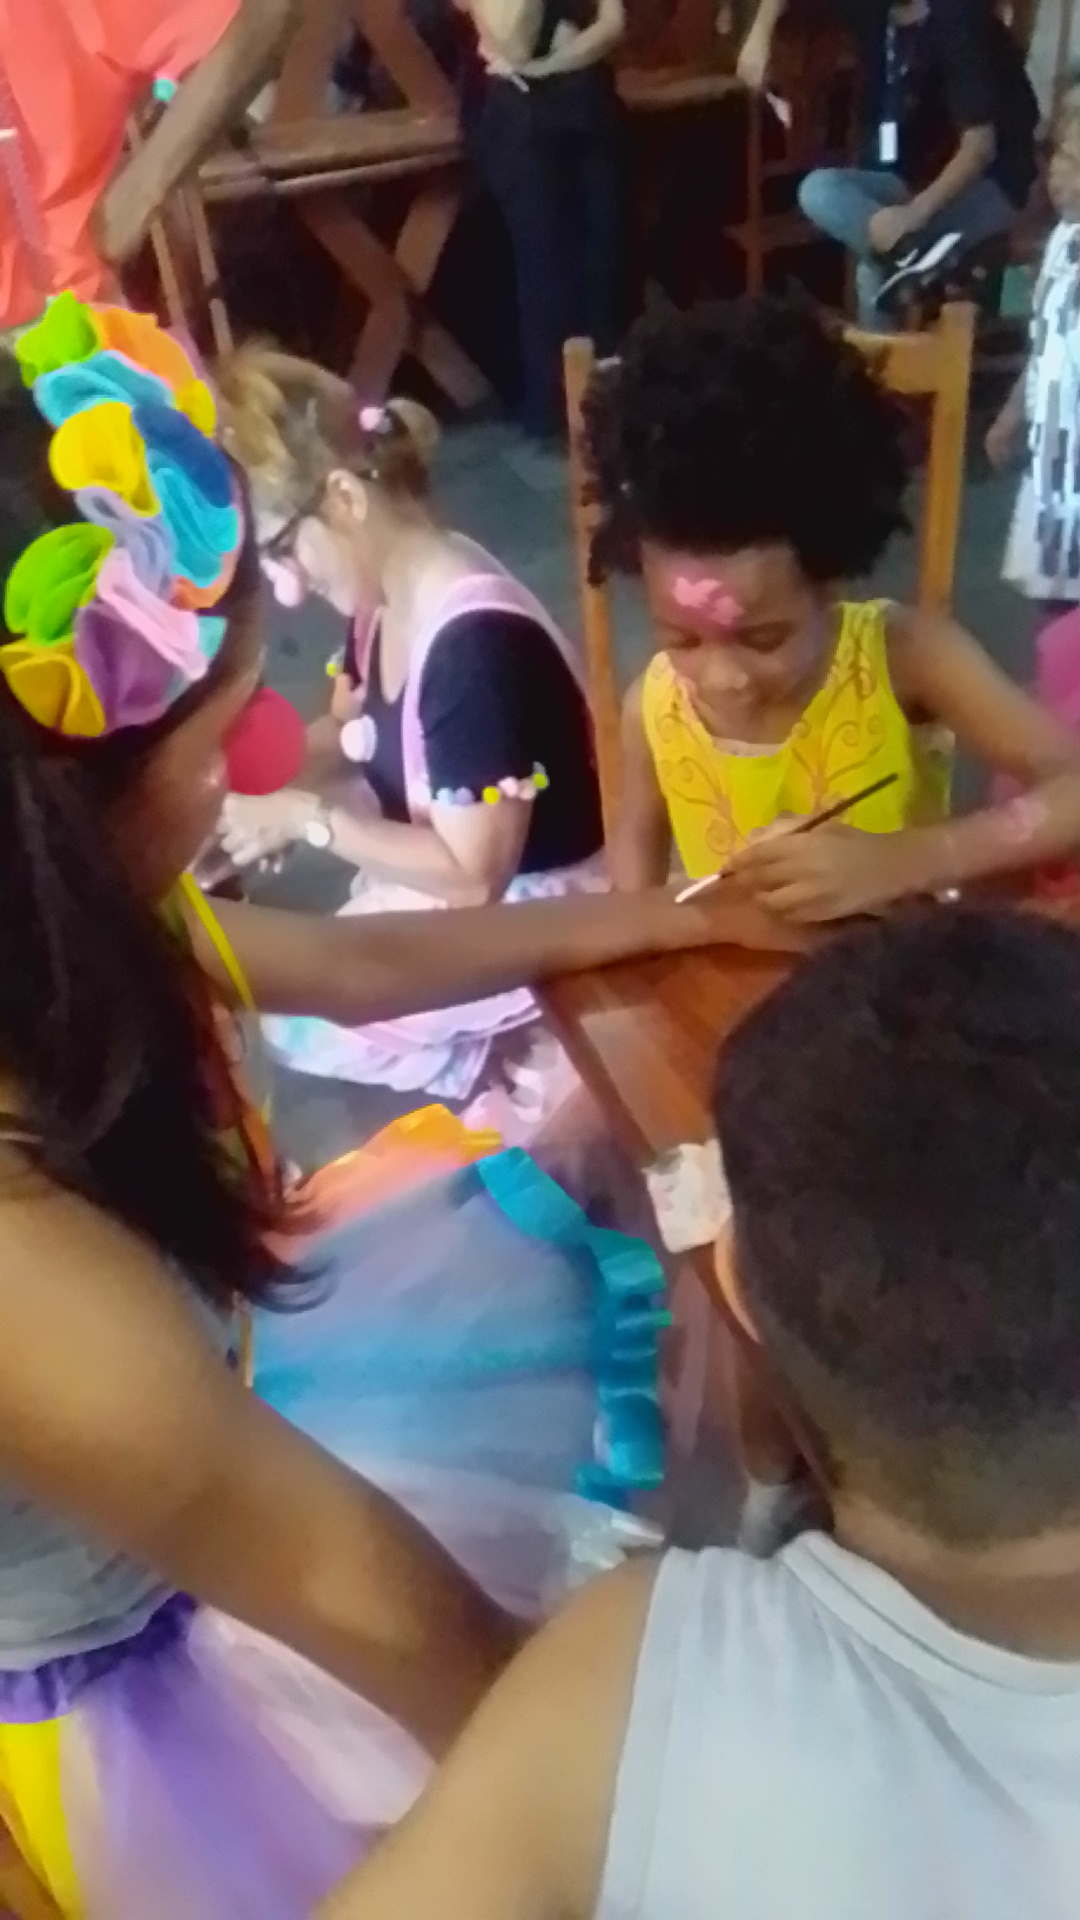 Princess Keilah Trott Bailey painting the clowns hand at kids party in Sao Paulo